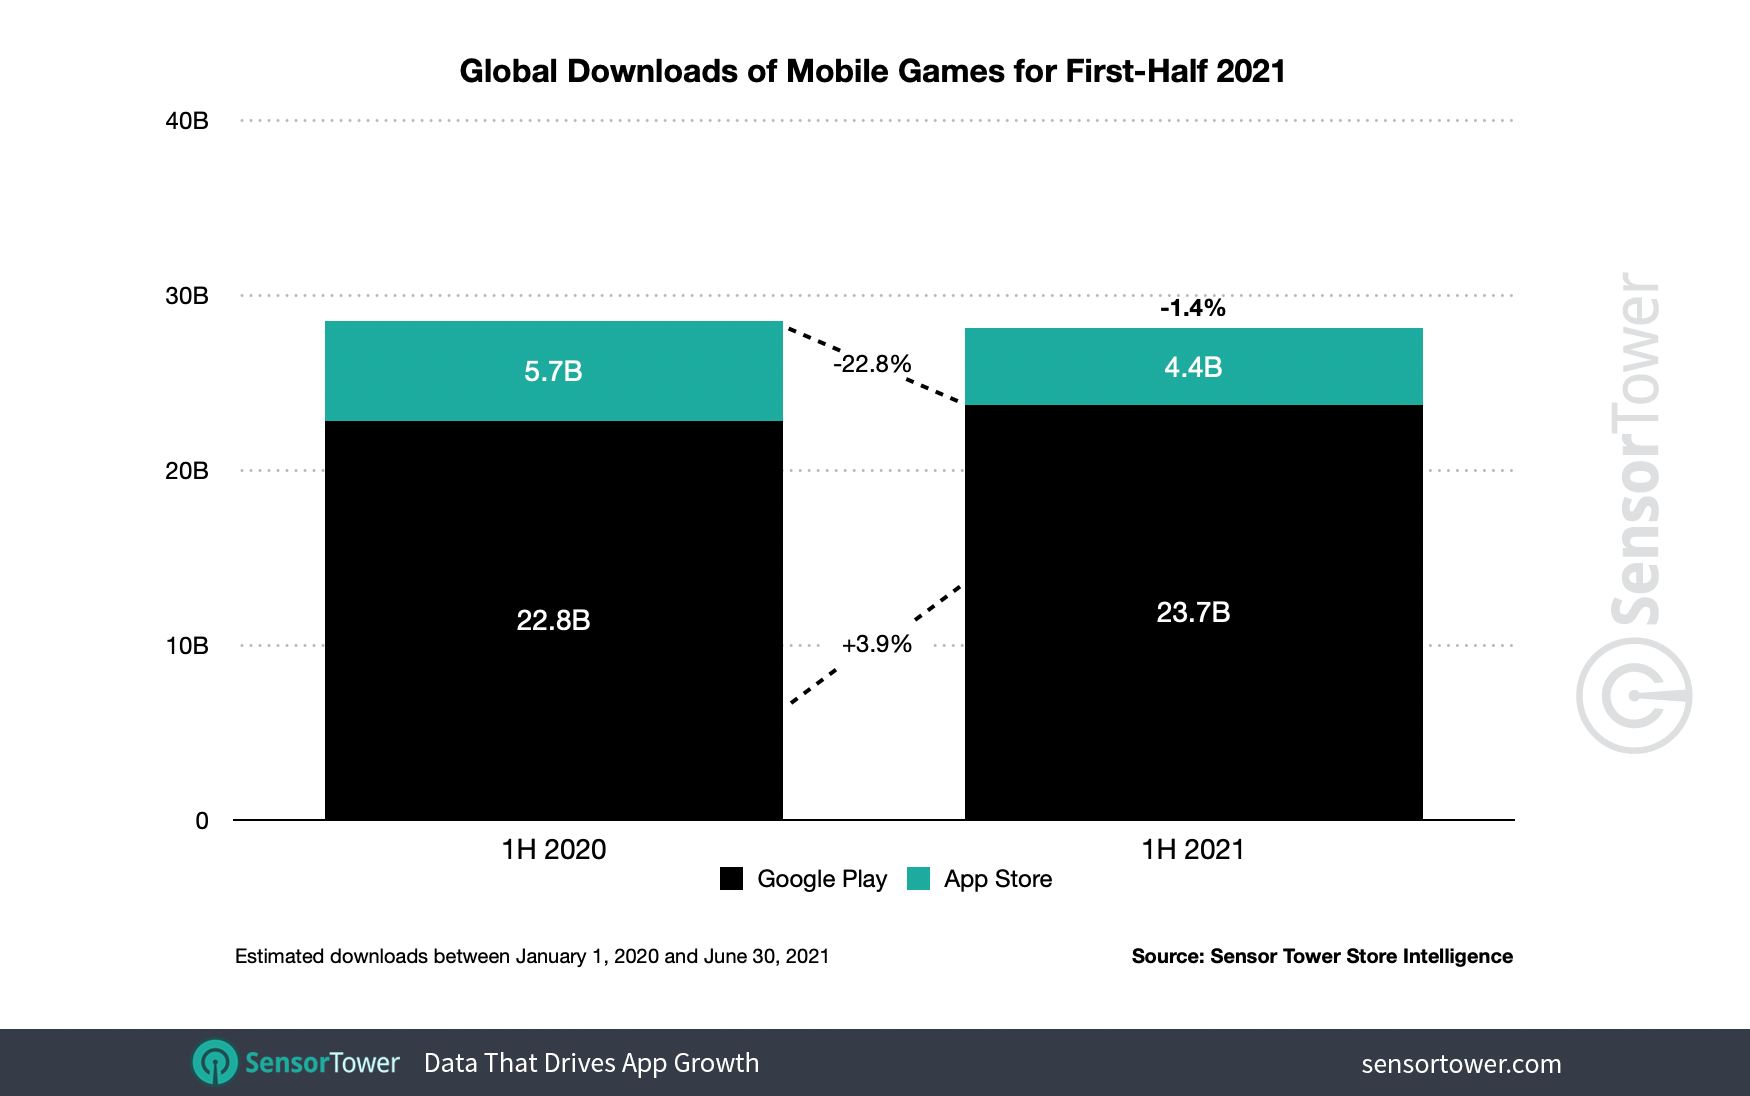 1H 2021 Mobile Game Downloads